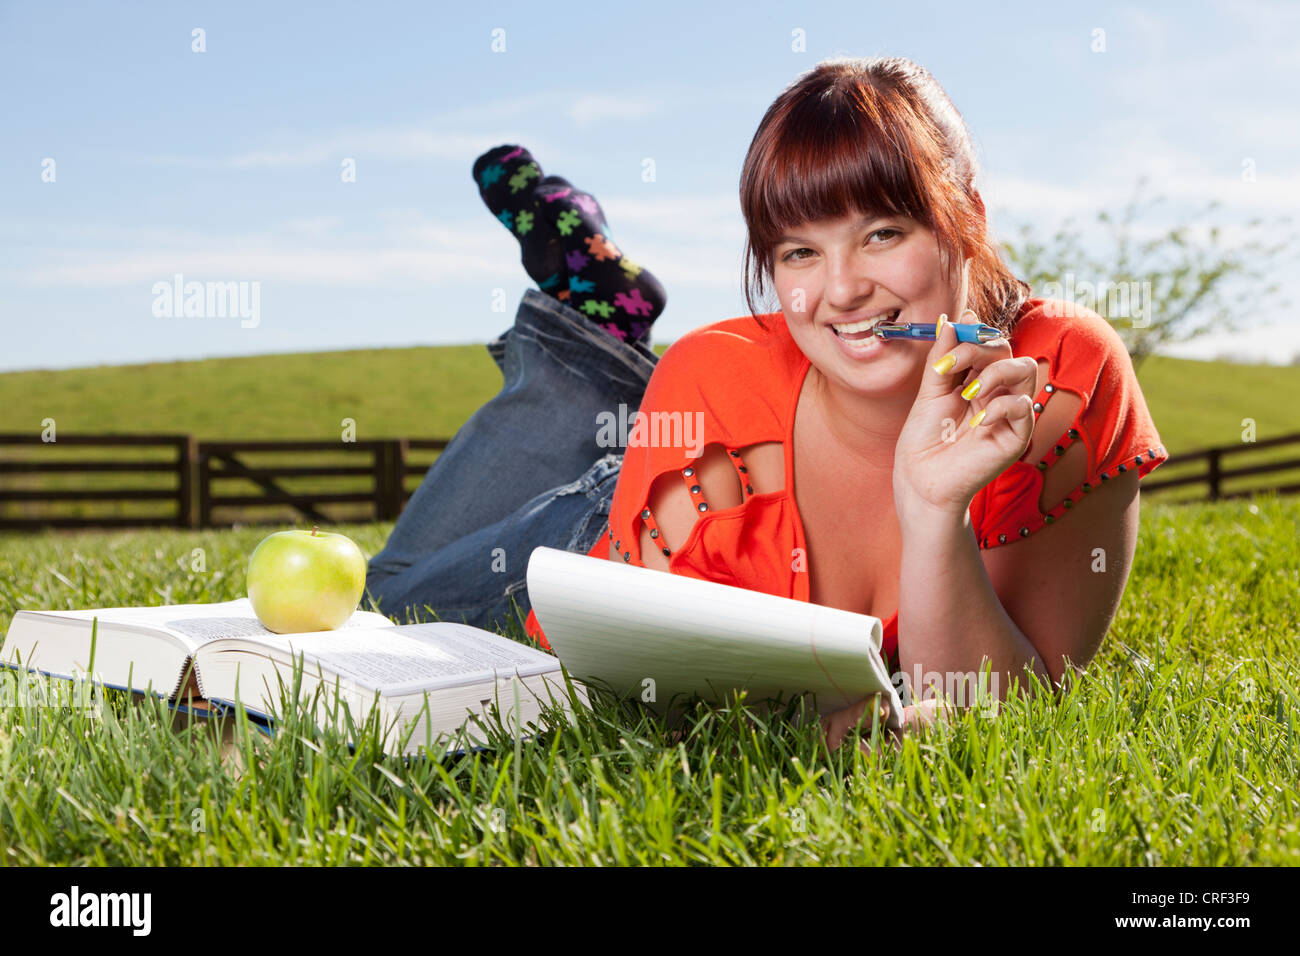 College student is studying outdoors Stock Photo